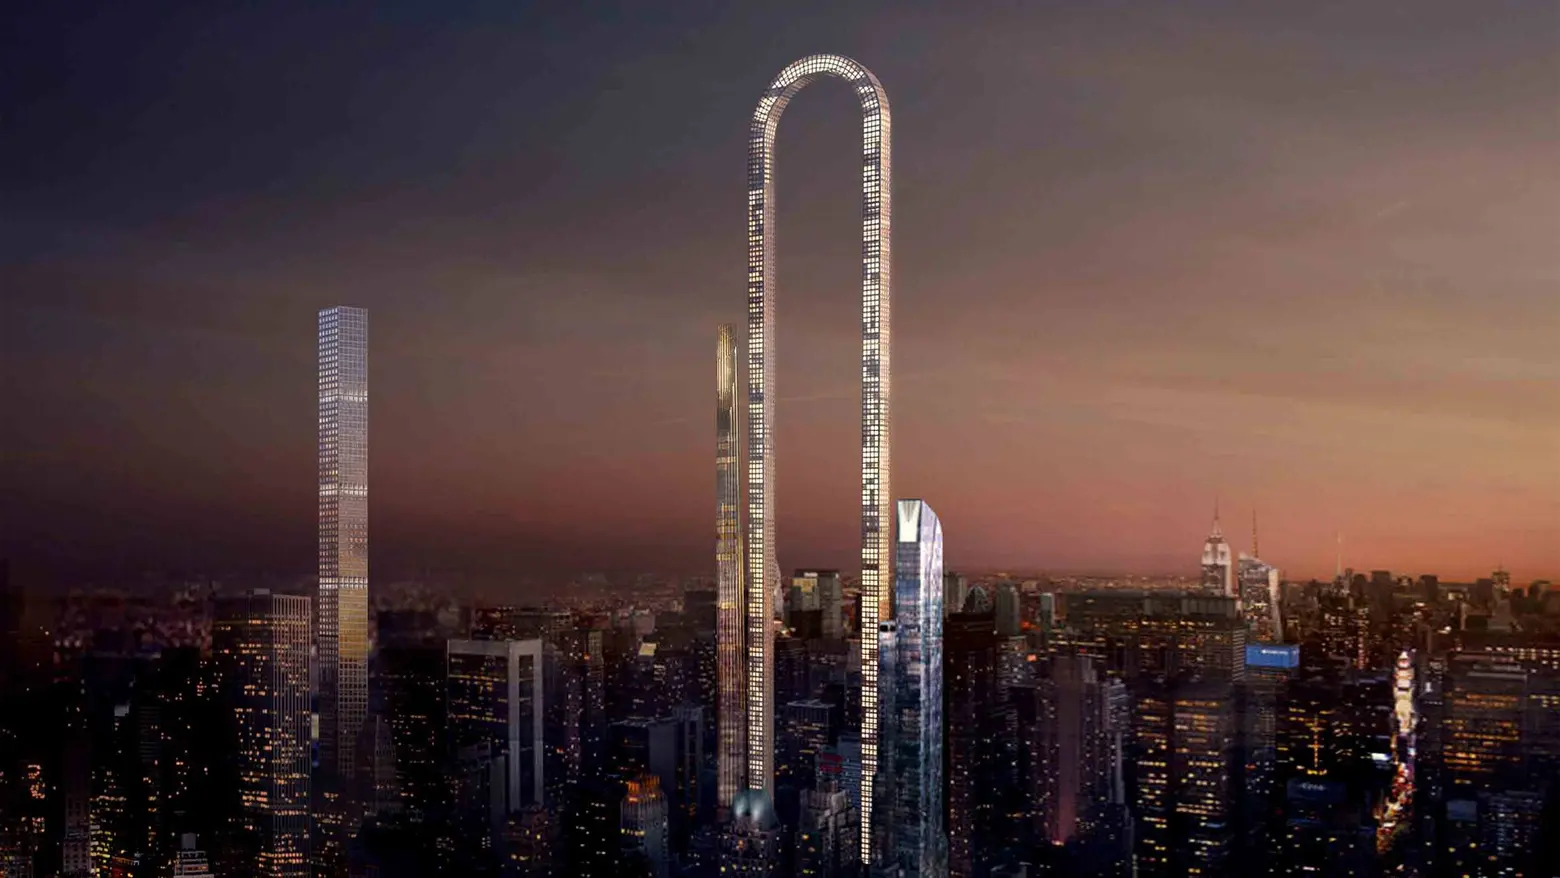 Oiio’s ‘Big Bend’ proposal for Billionaires’ Row would be the world’s longest building